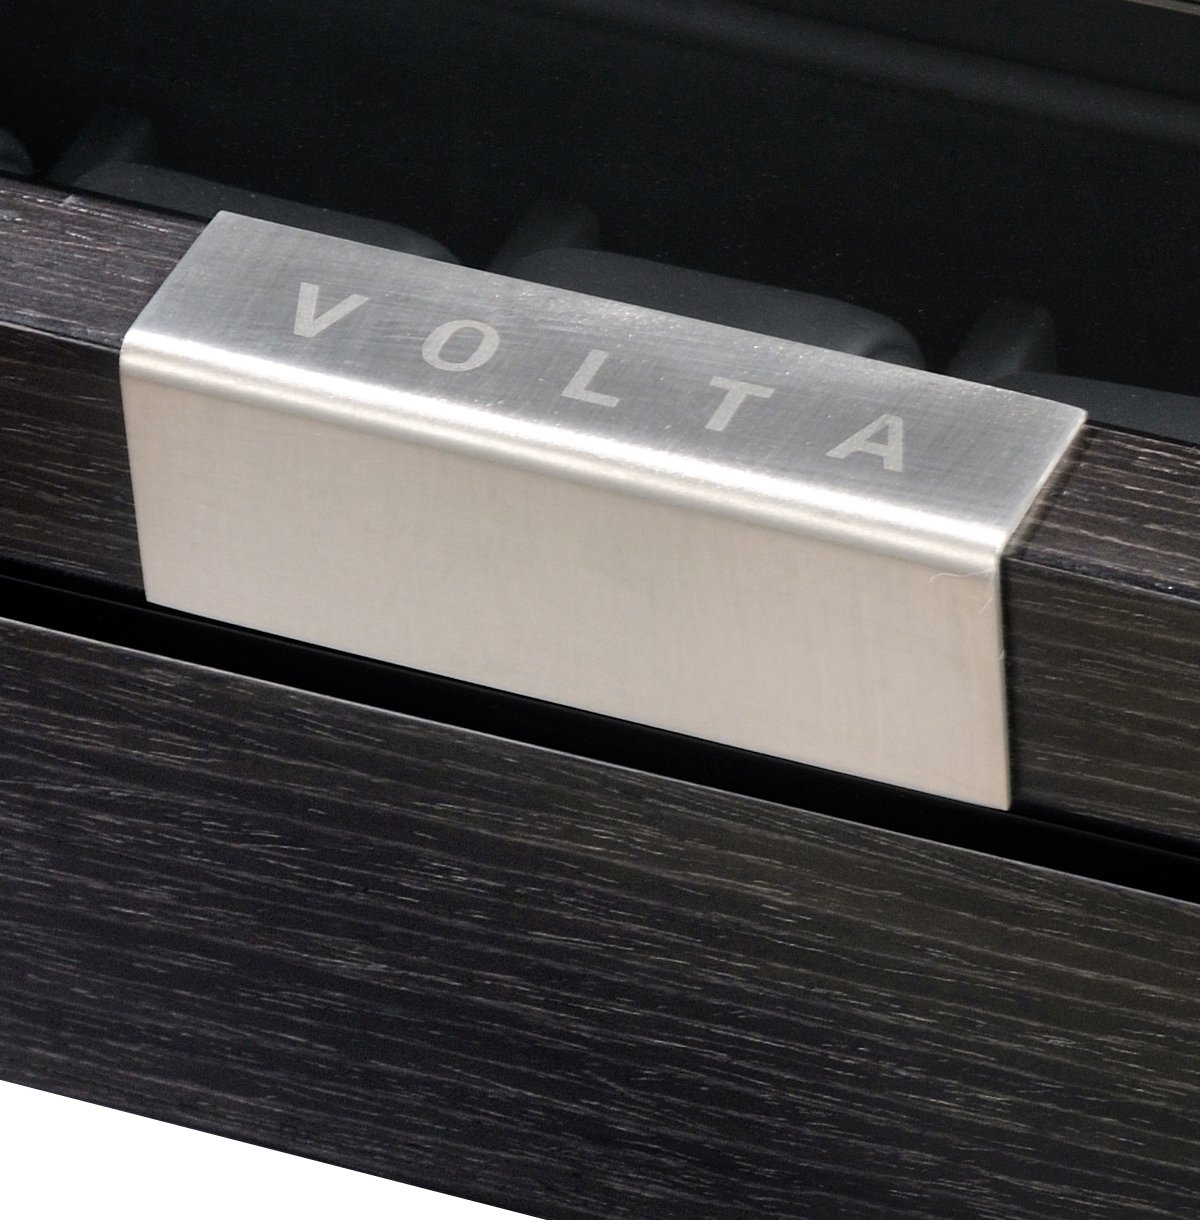 Volta 31-560950 Charcoal Wood Finish Watch Case